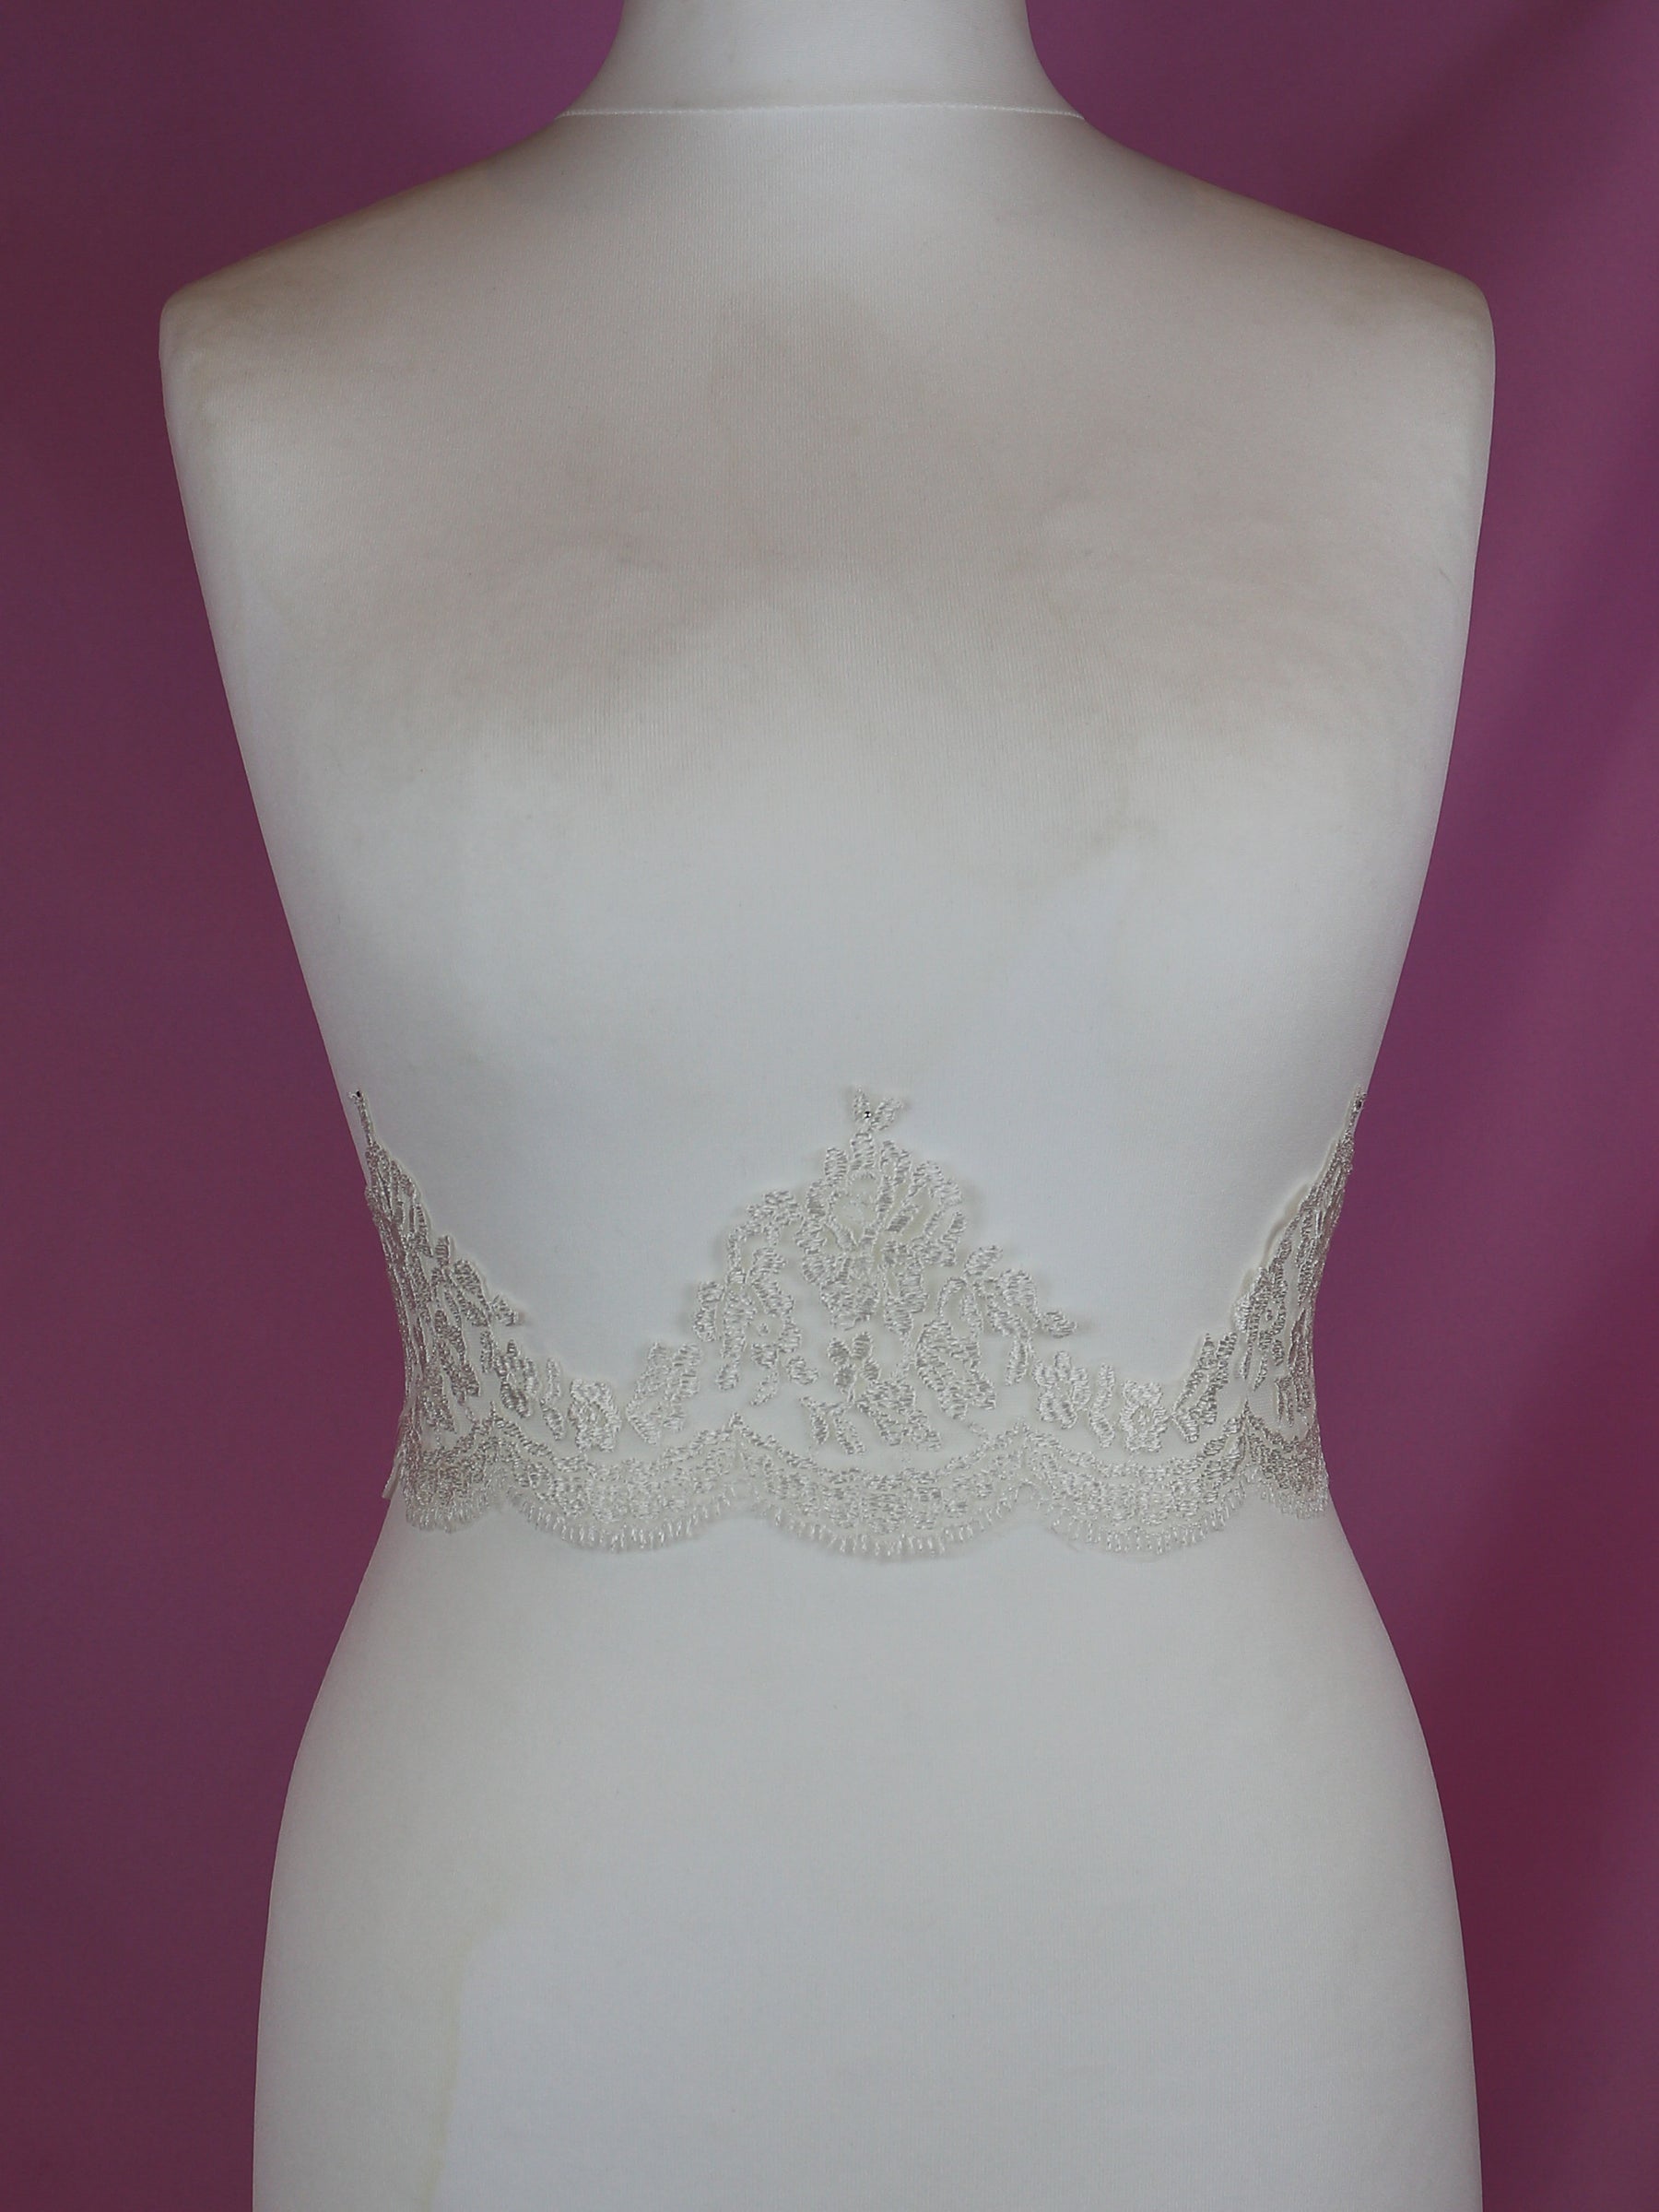 Ivory Embroidered Lace Trim - Dominique